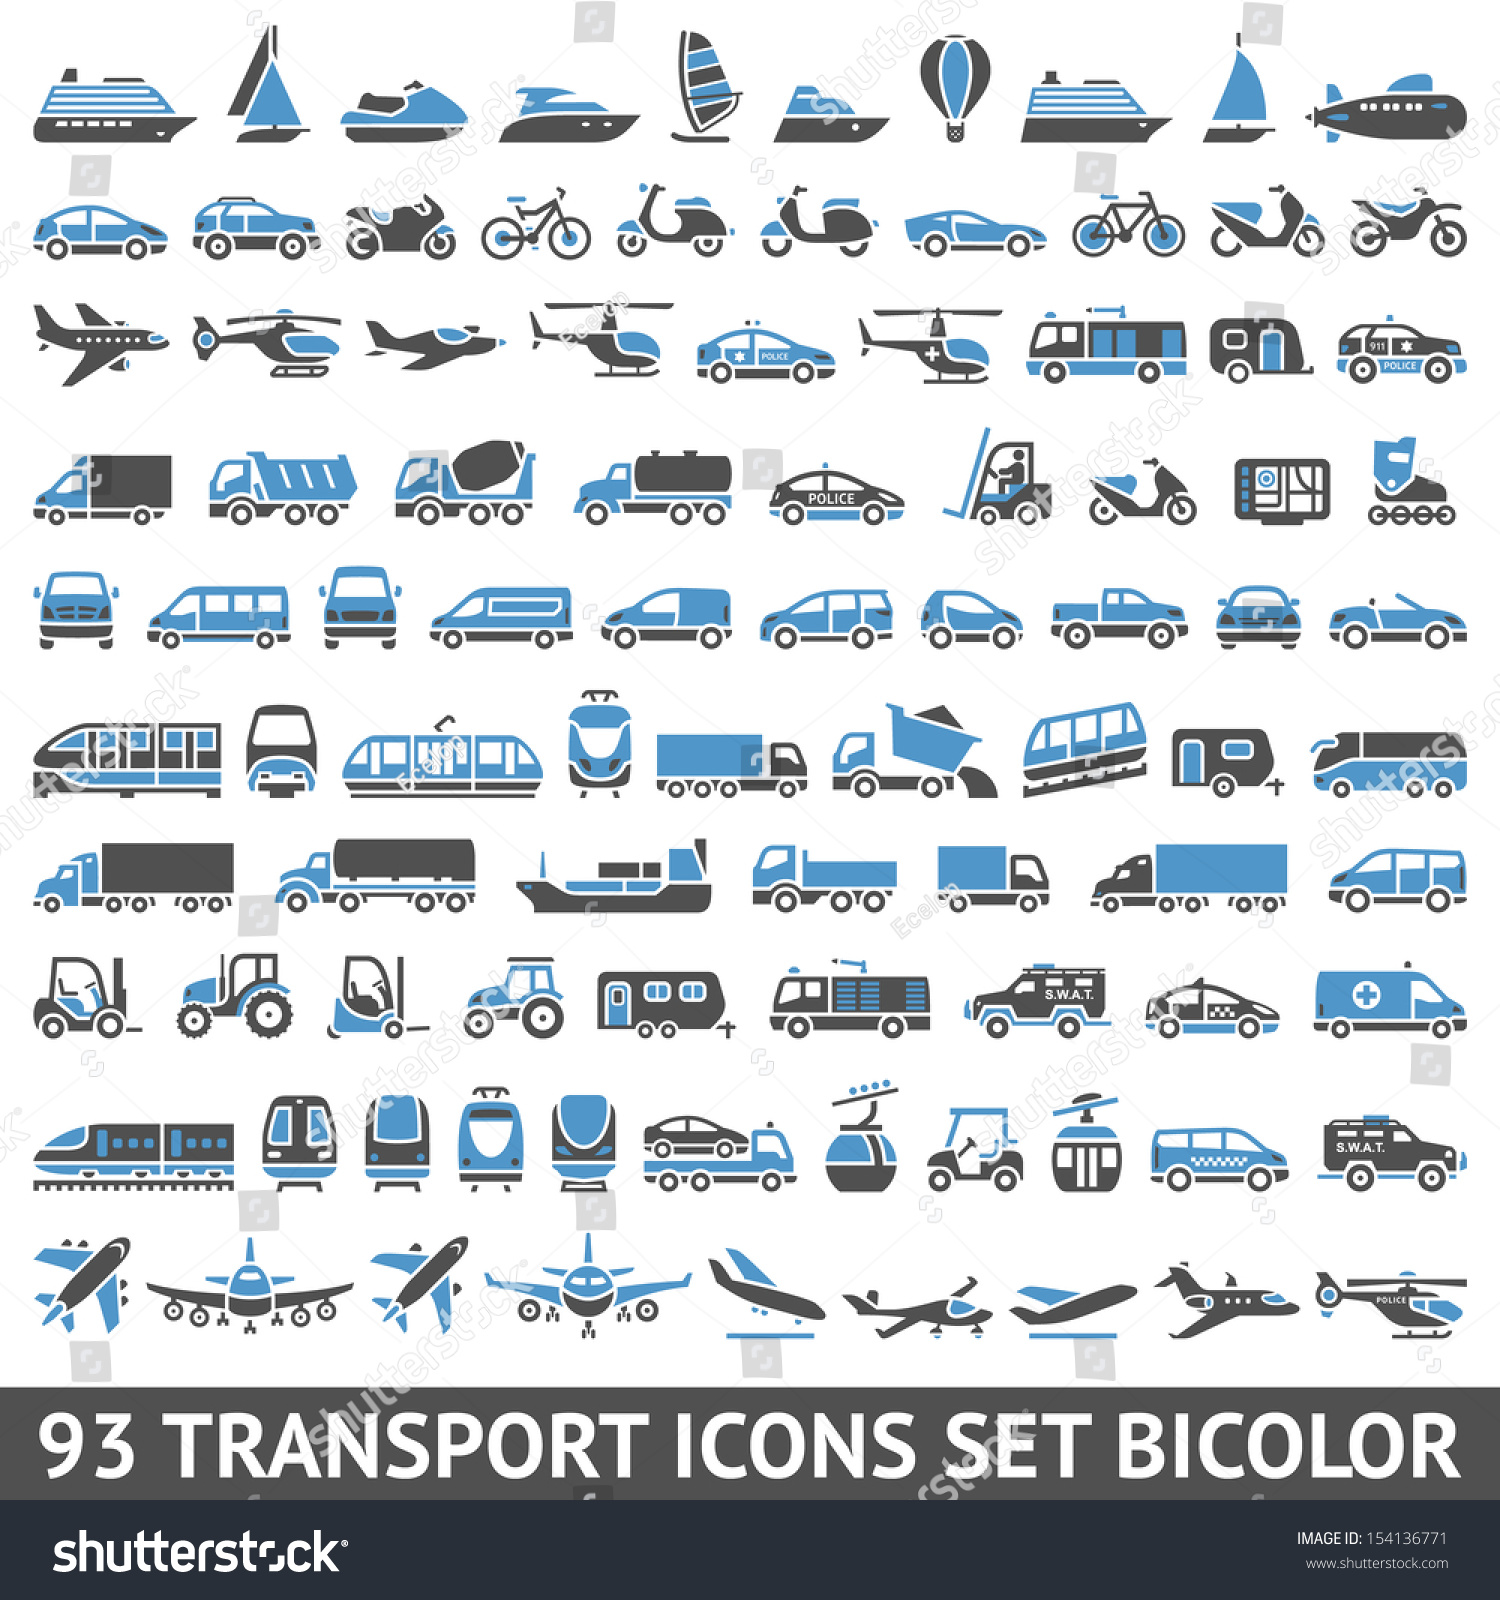 SVG of 93 Transport icons set bicolor (blue and gray colors), vector illustrations, silhouettes isolated on white background svg